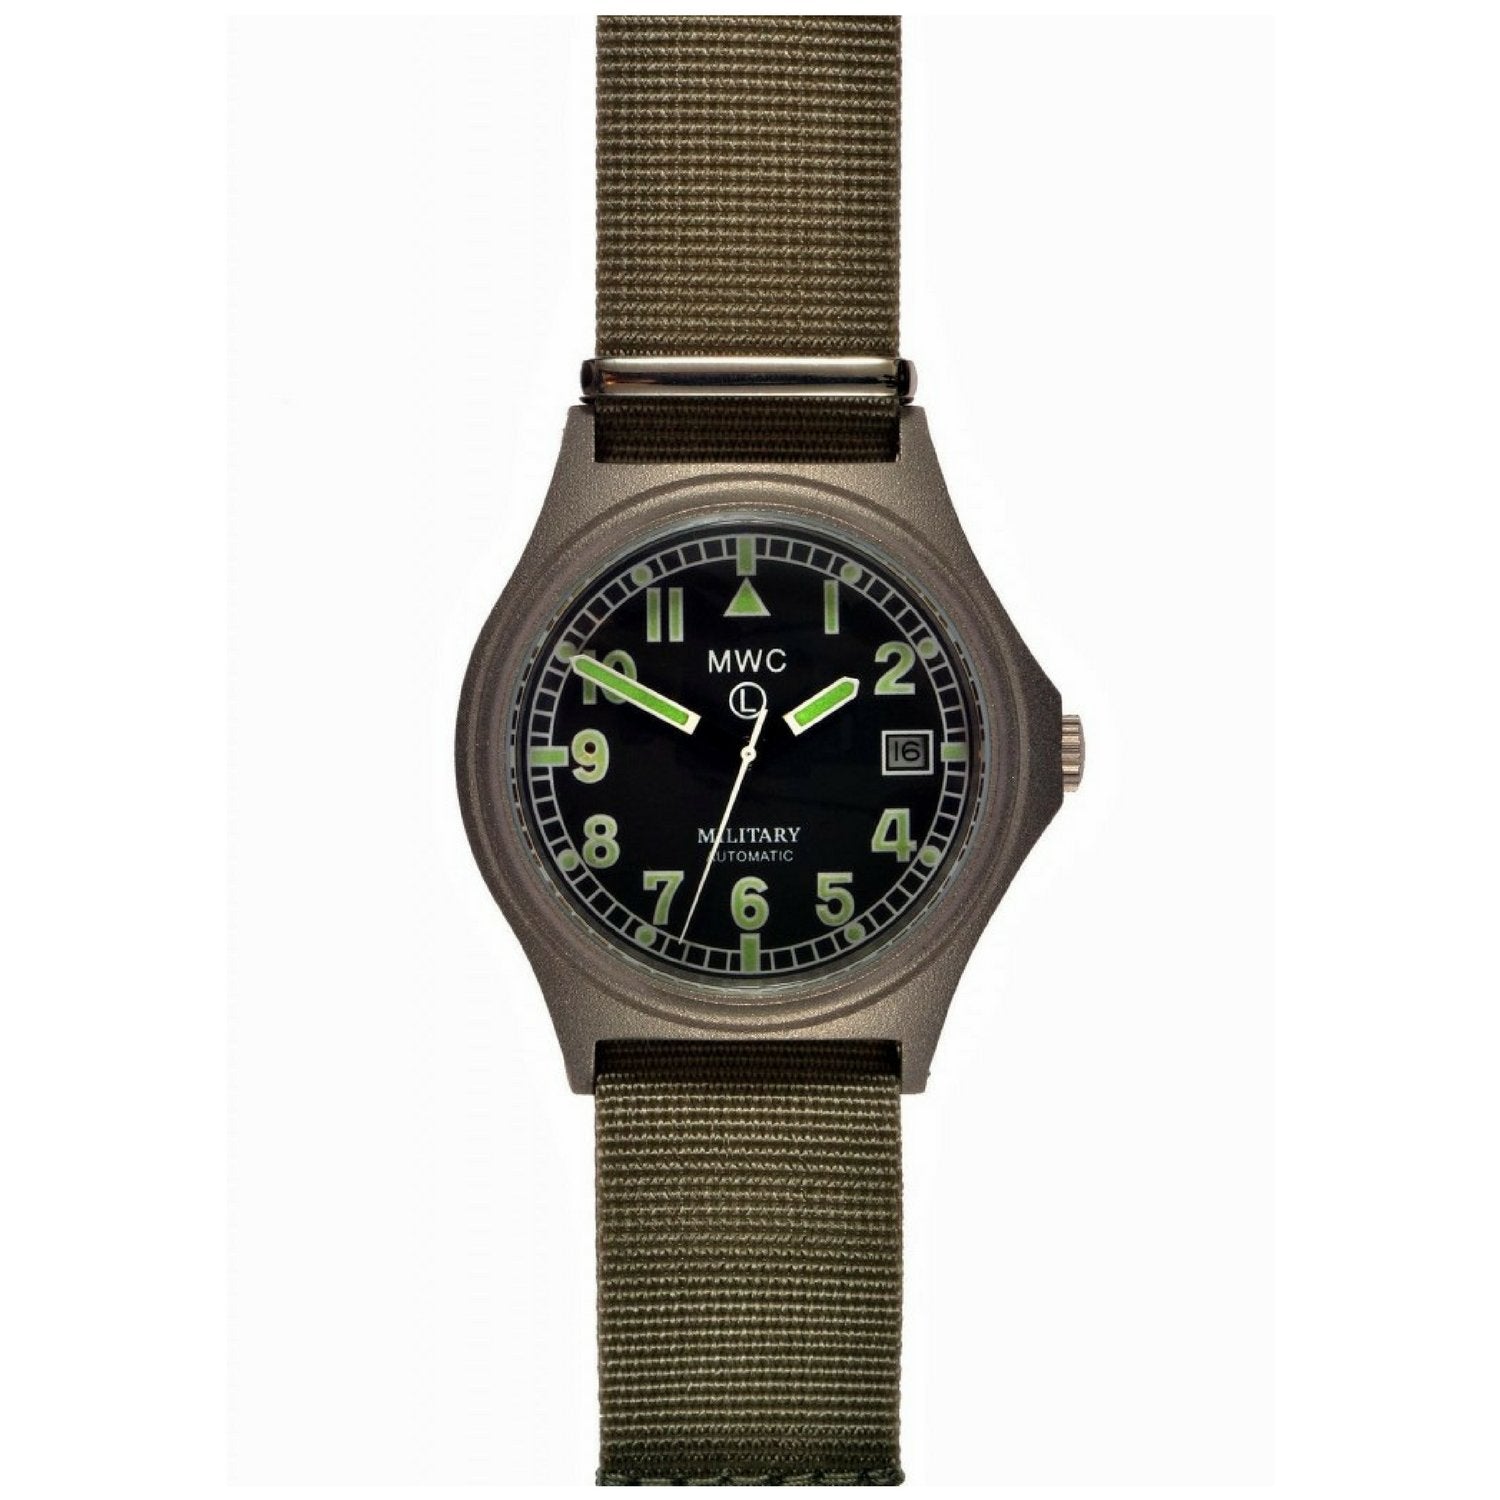 Mwc G10 Automatic 100m Water Resistant Military Watch Chronopolis International Watches